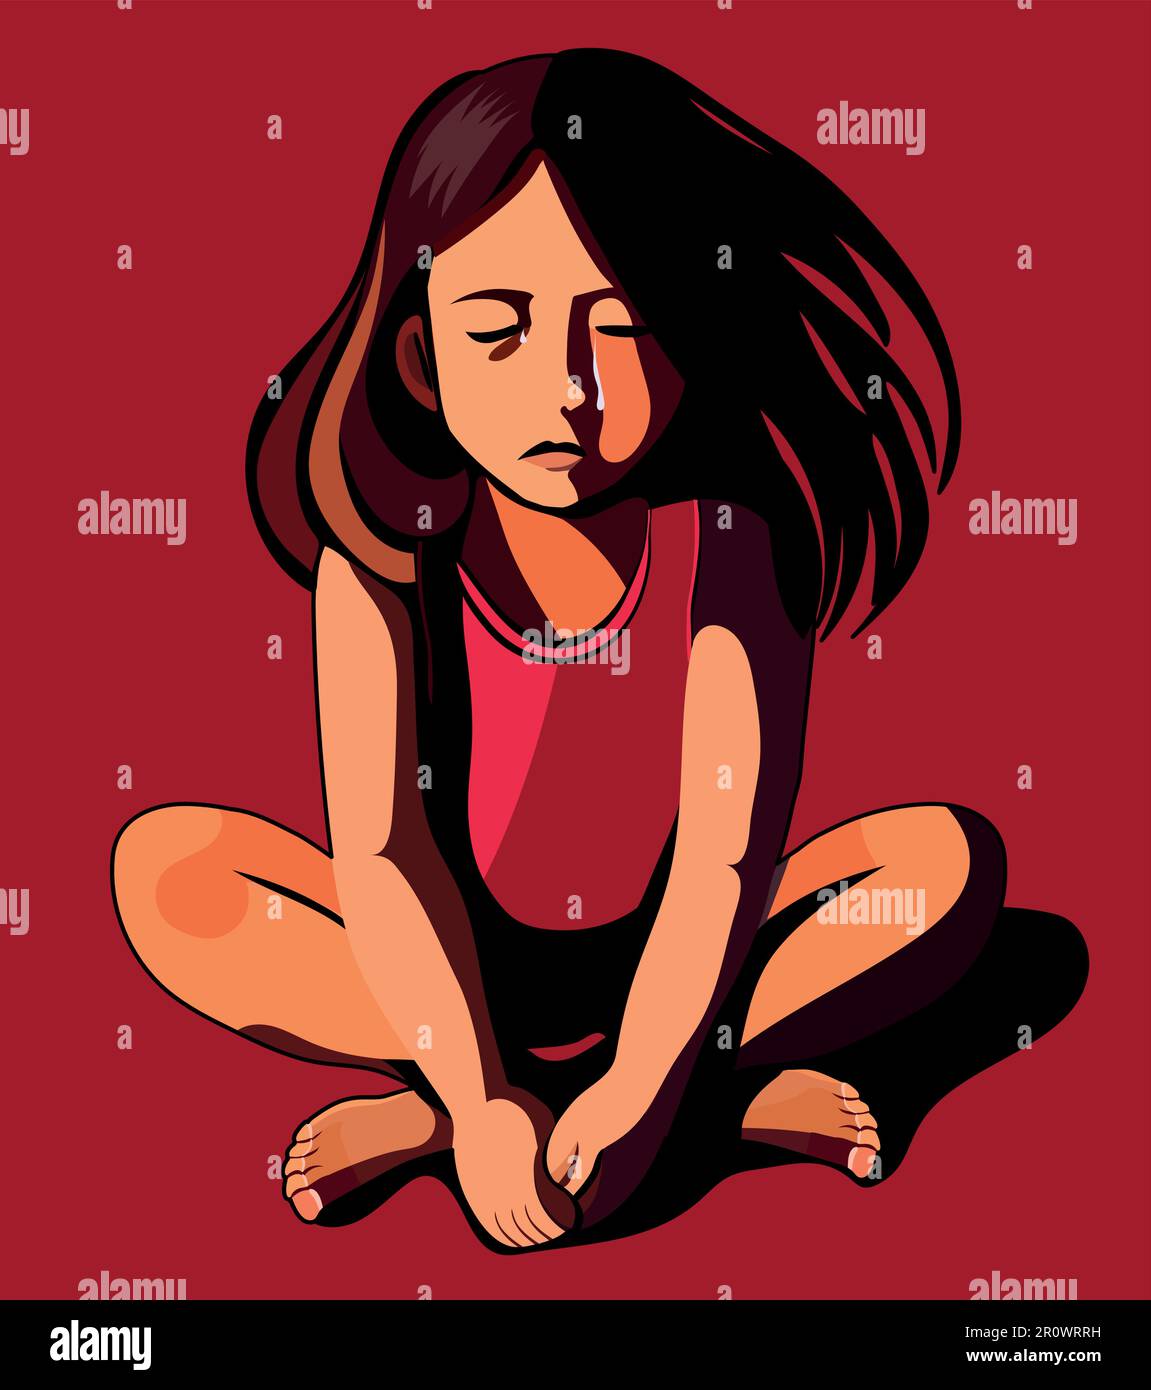 Child abuse, social problems, bullying, little girl with crossed legs crying helpless. Problems in the family. Violence against minors Stock Vector